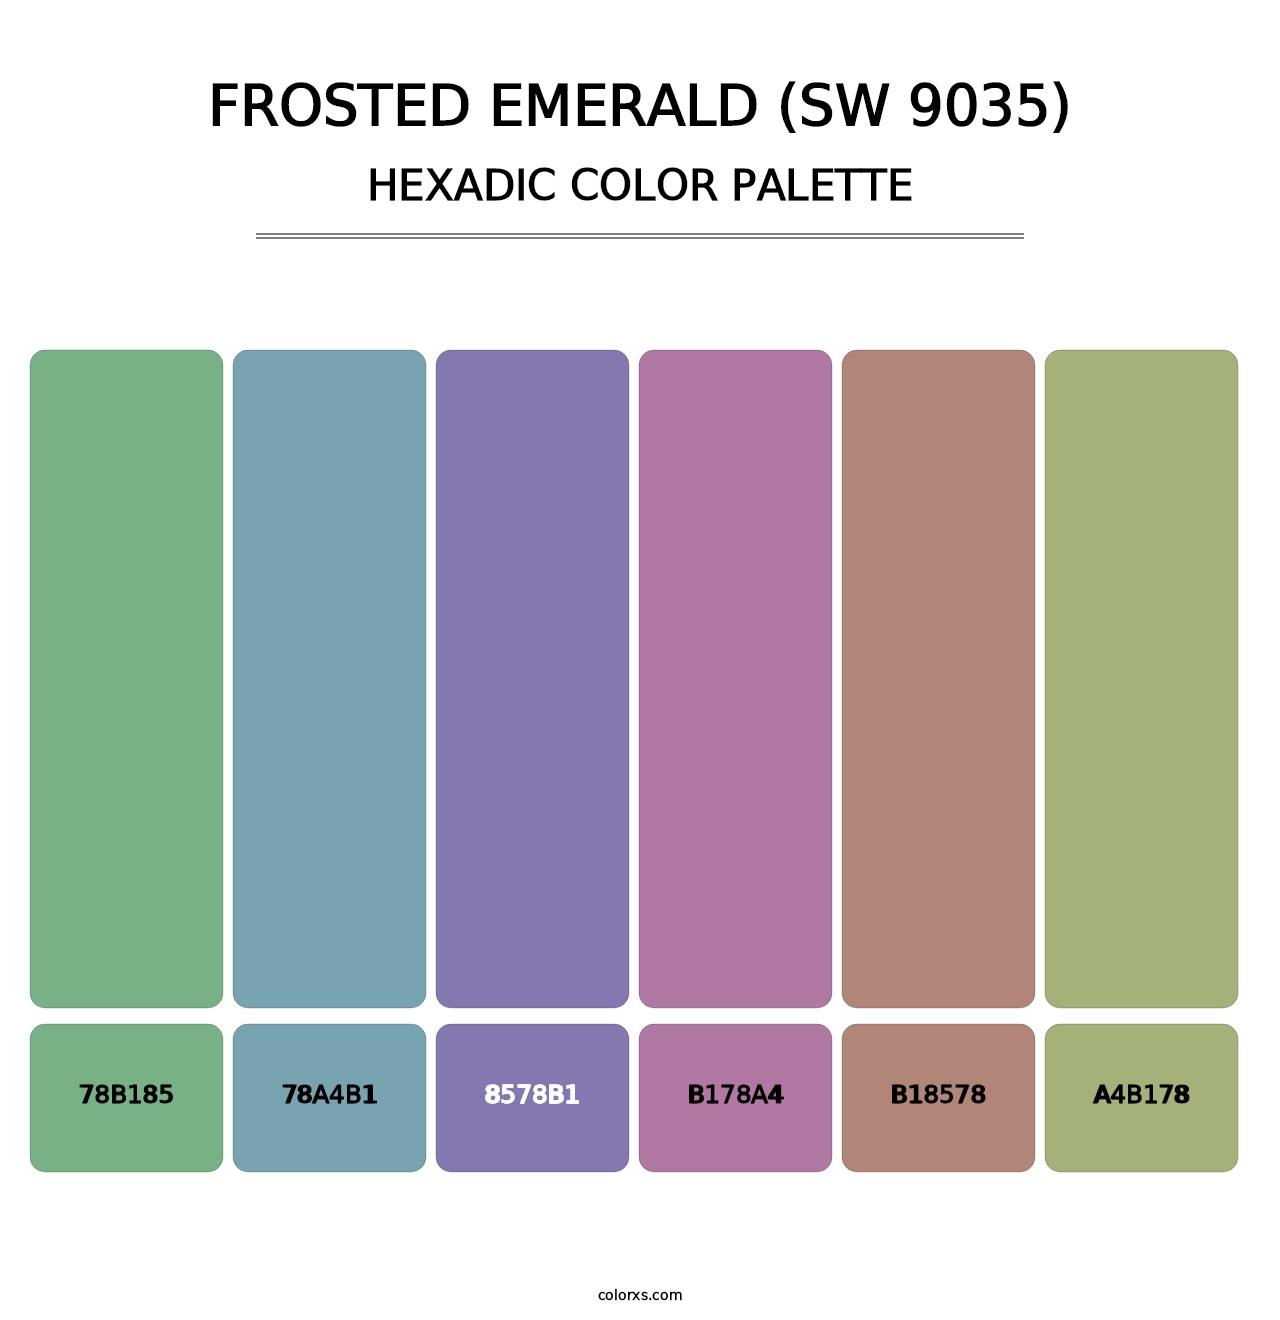 Frosted Emerald (SW 9035) - Hexadic Color Palette